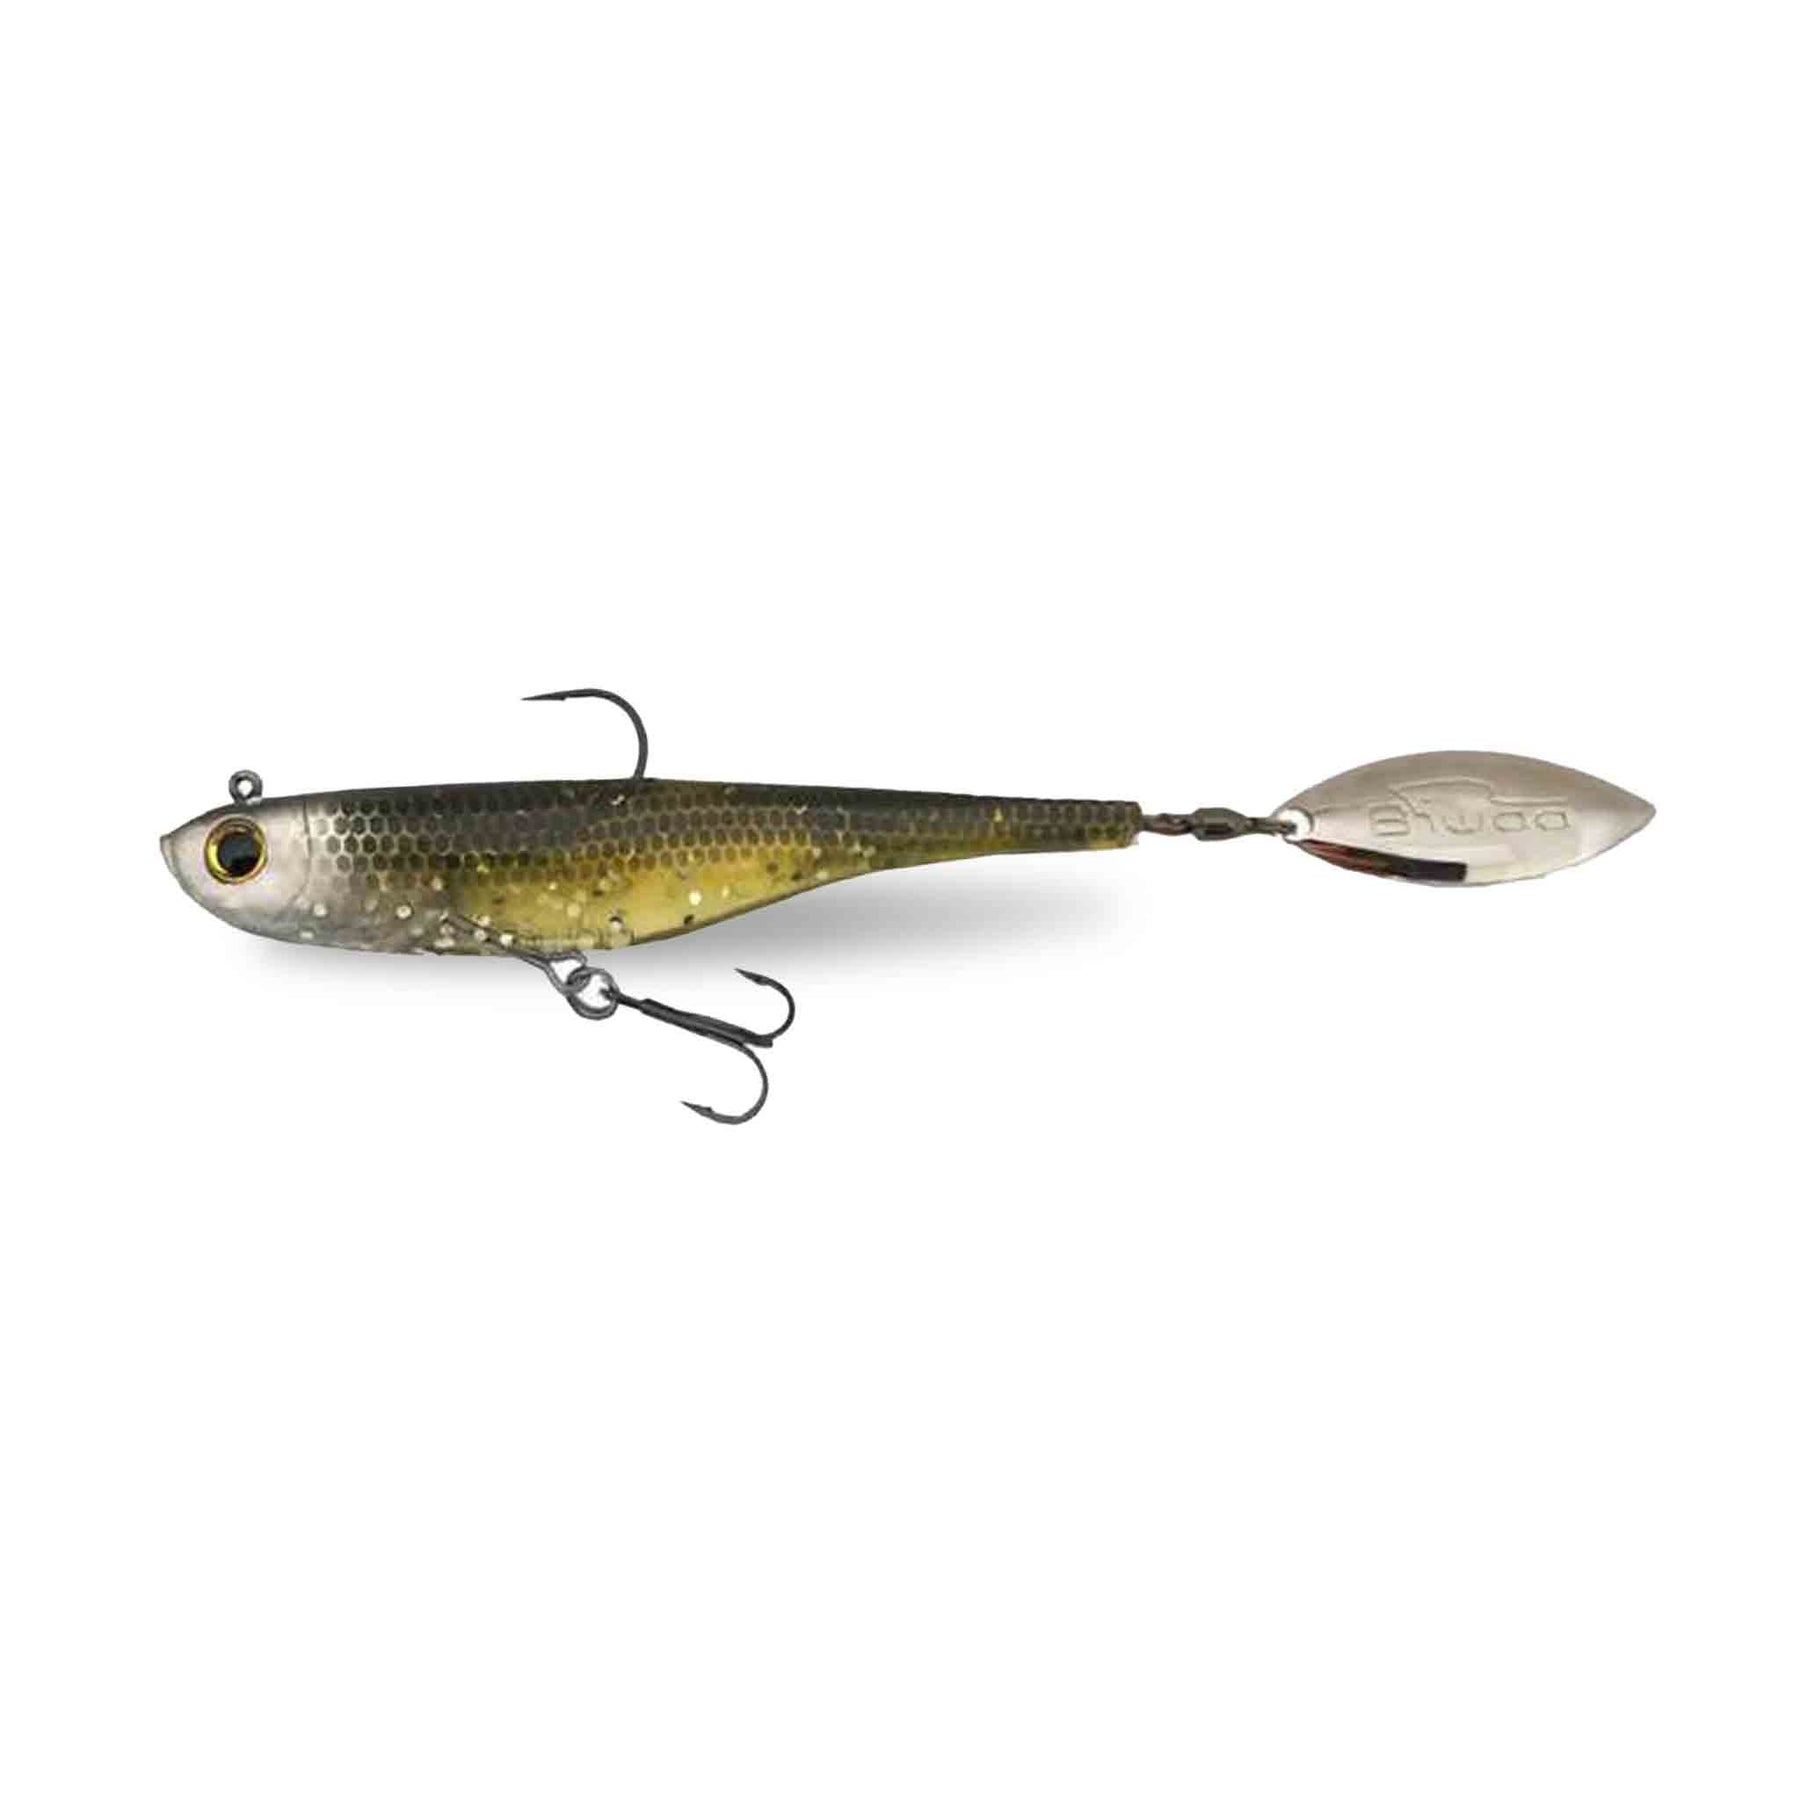 View of Swimbaits Biwaa Divinator Junior 22g Tailspin Swimbait Ghost Sliver Holo available at EZOKO Pike and Musky Shop